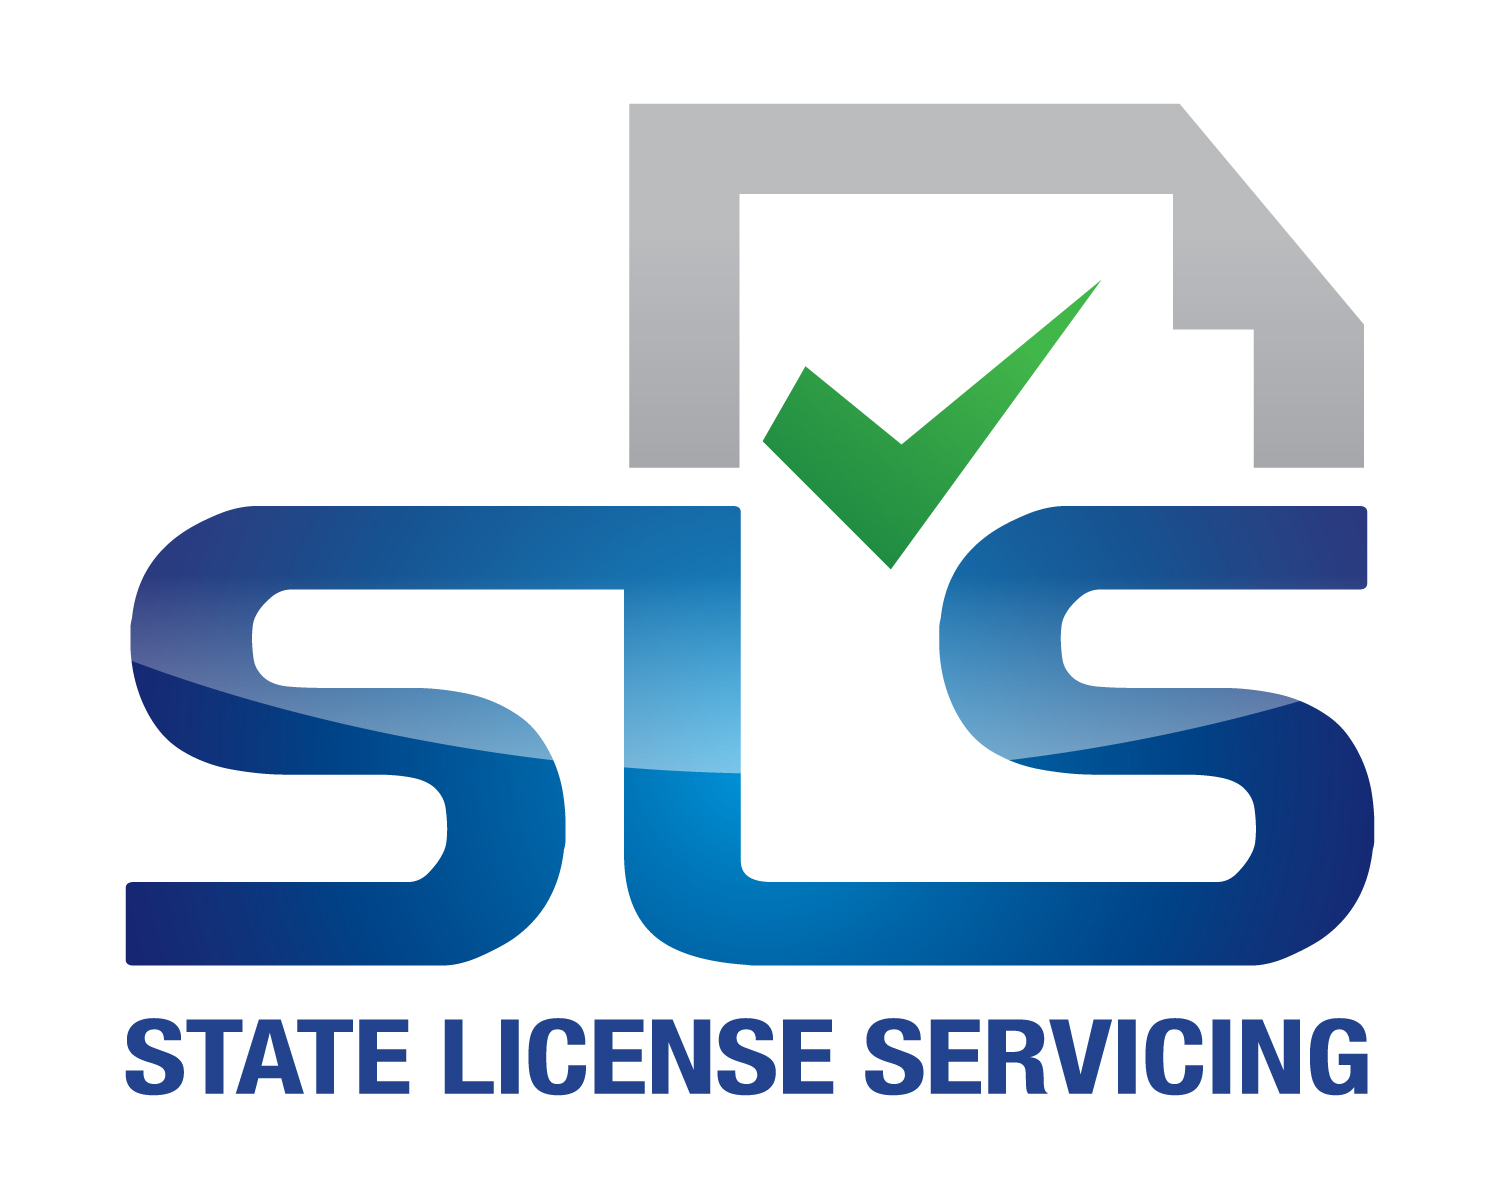 State License Servicing Logo Here